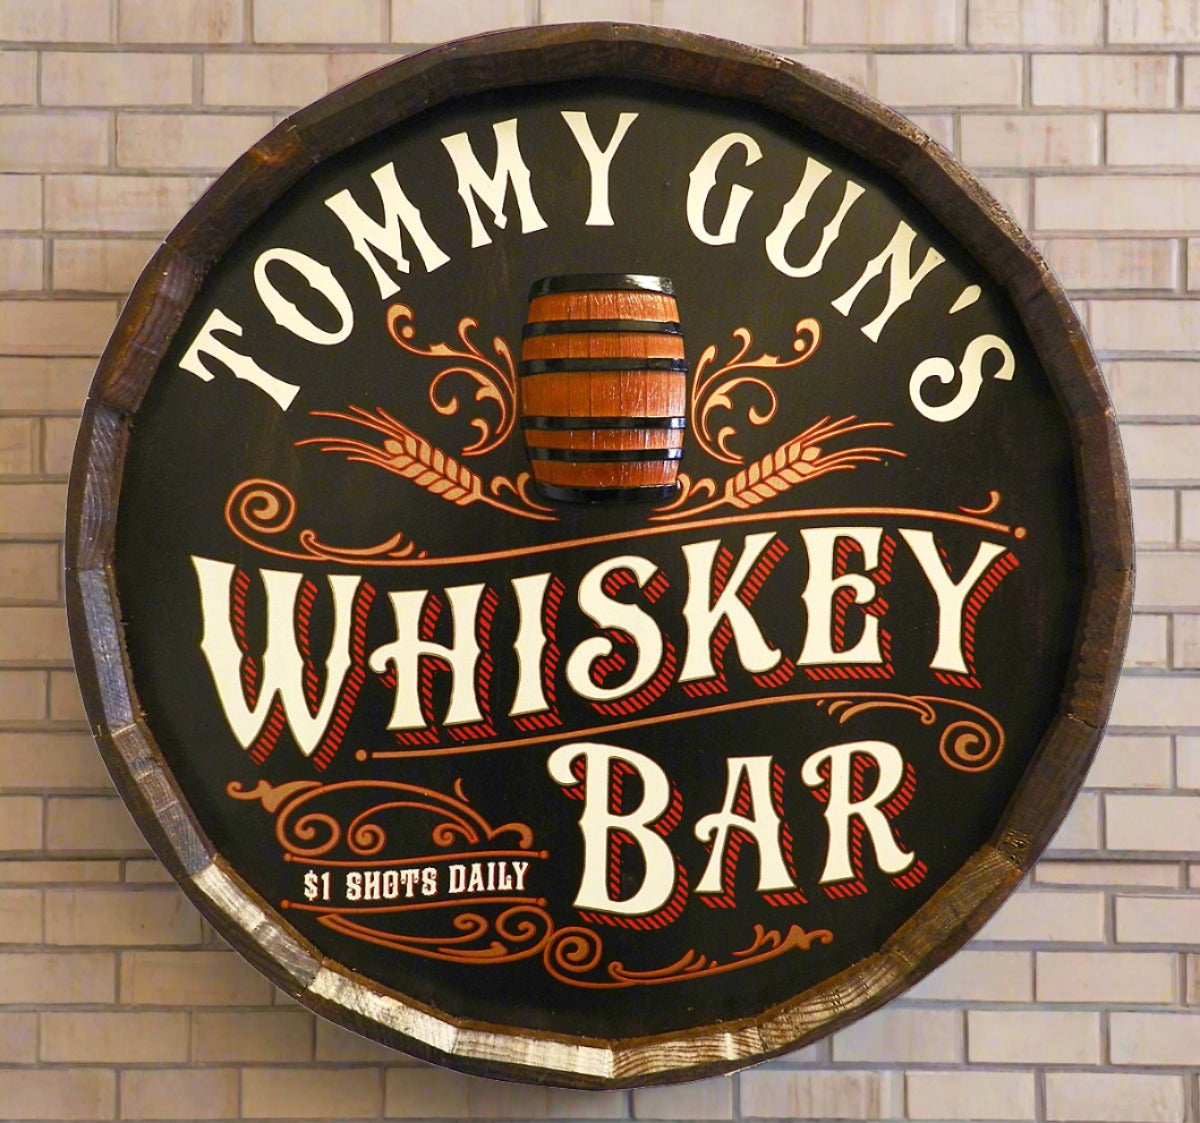 Personalized Whiskey Bar Quarter Barrel Sign with Relief